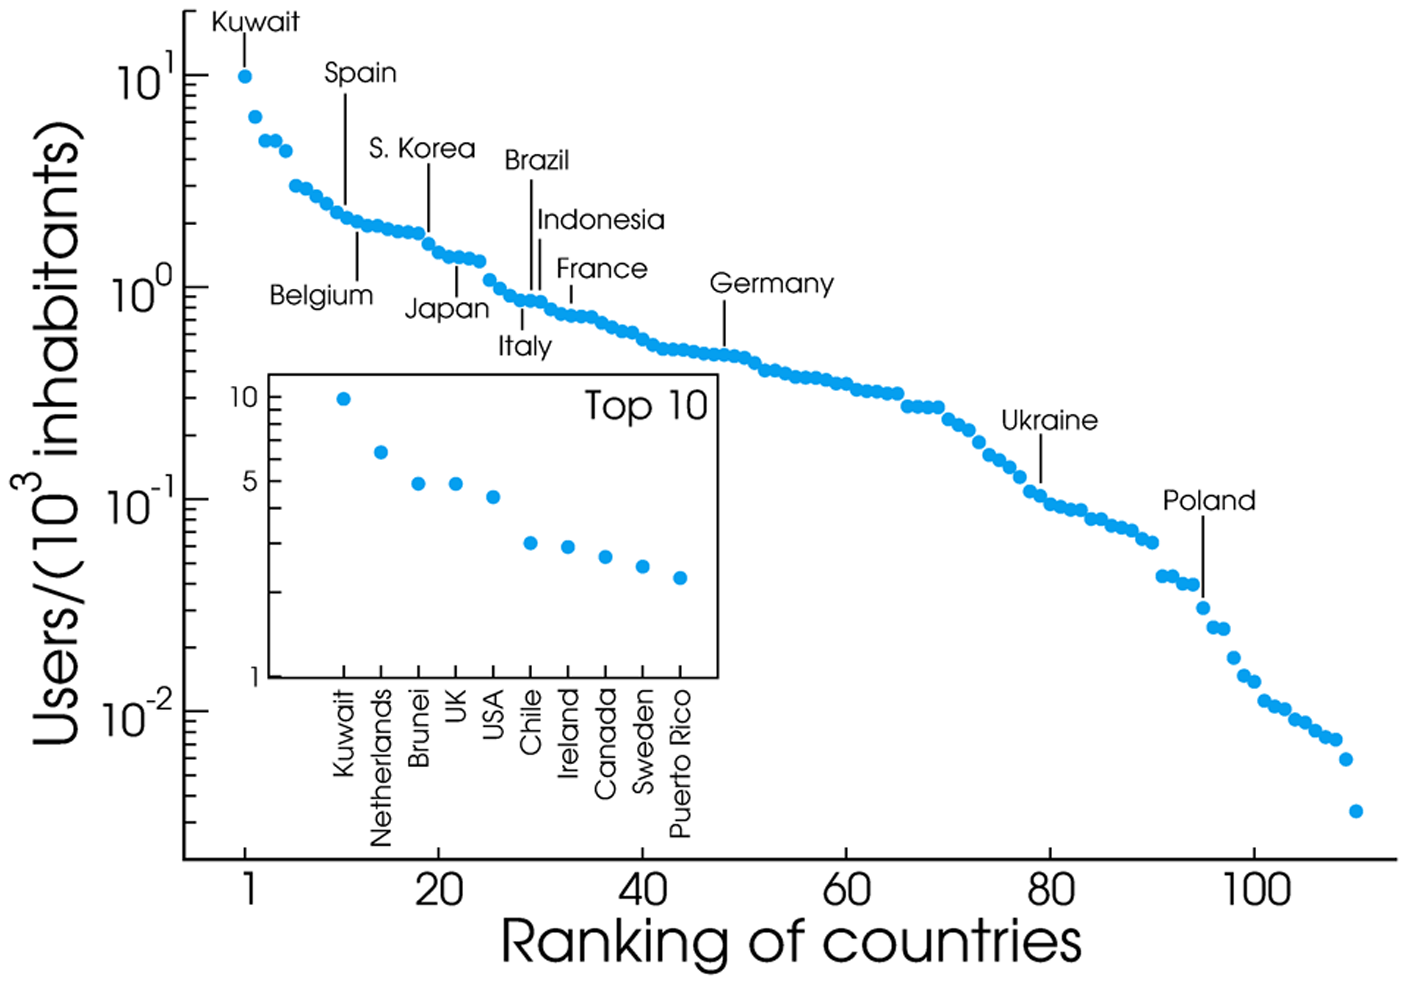 Twitter: Ranking of countries by users per capita